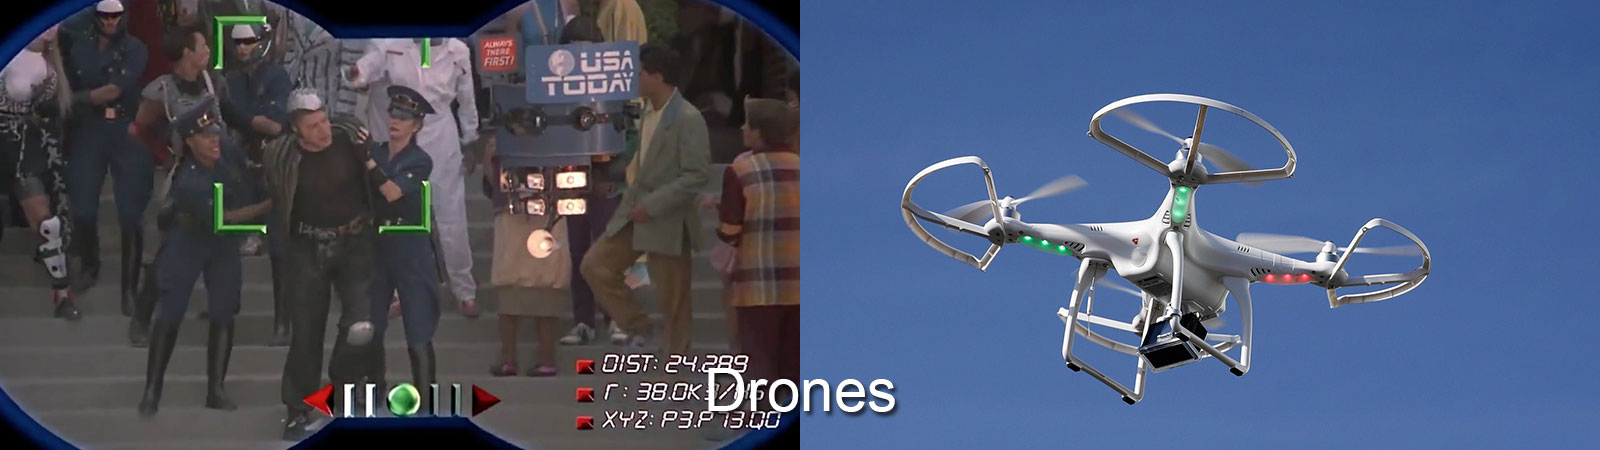 Back to the Future II vs. 2015 The Reality